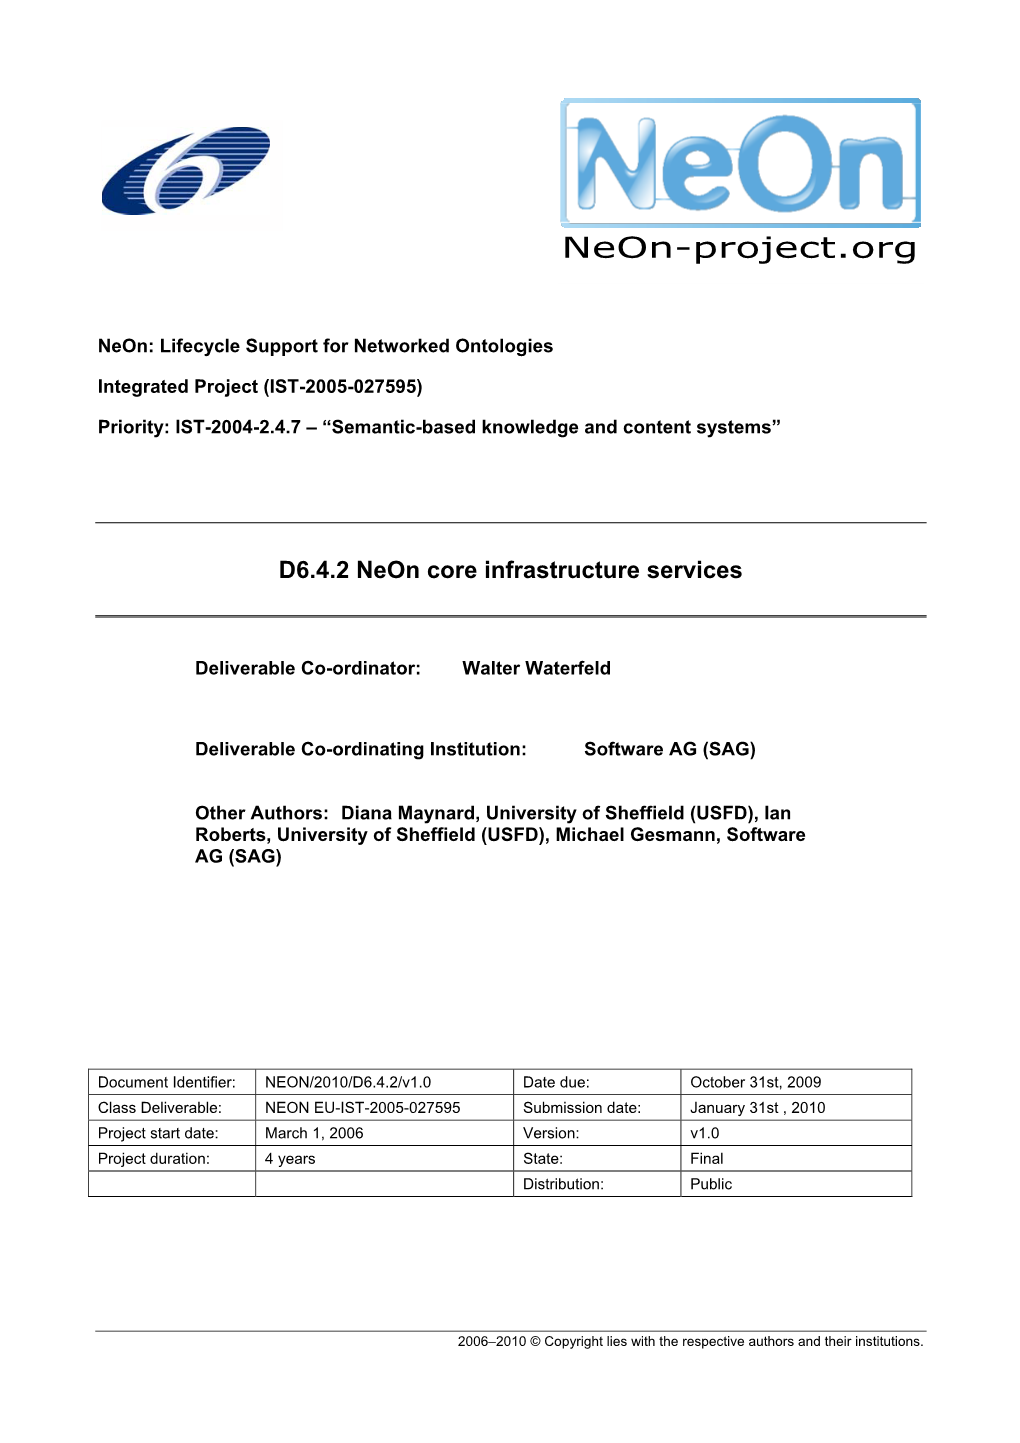 Neon Core Infrastructure Services